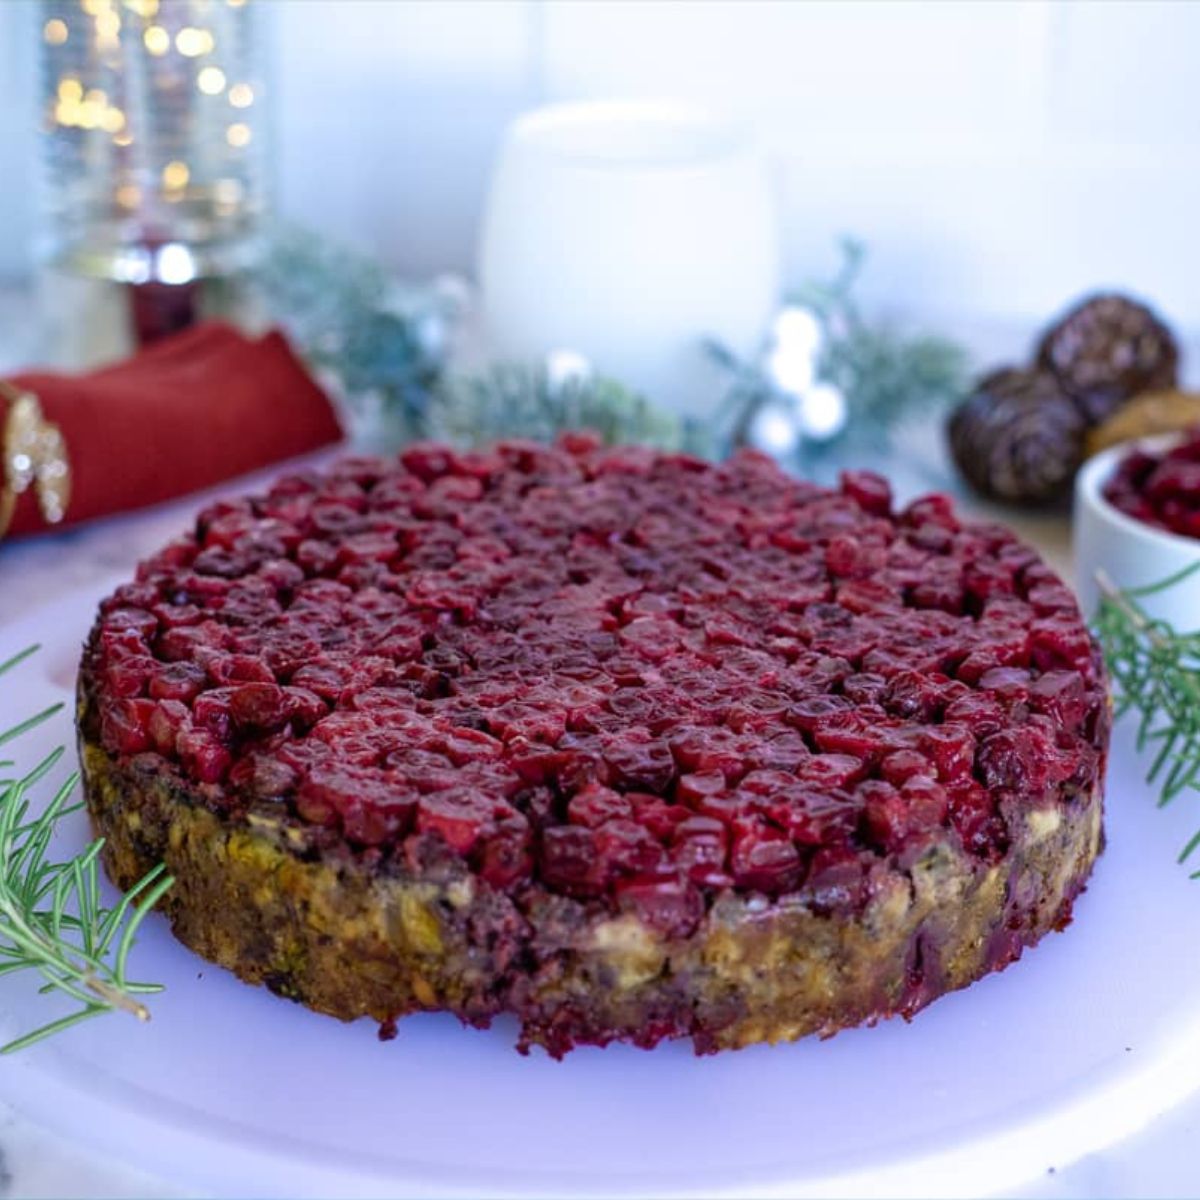 Nut Roast with Cranberries - Keto & Low Carb Vegetarian Recipes